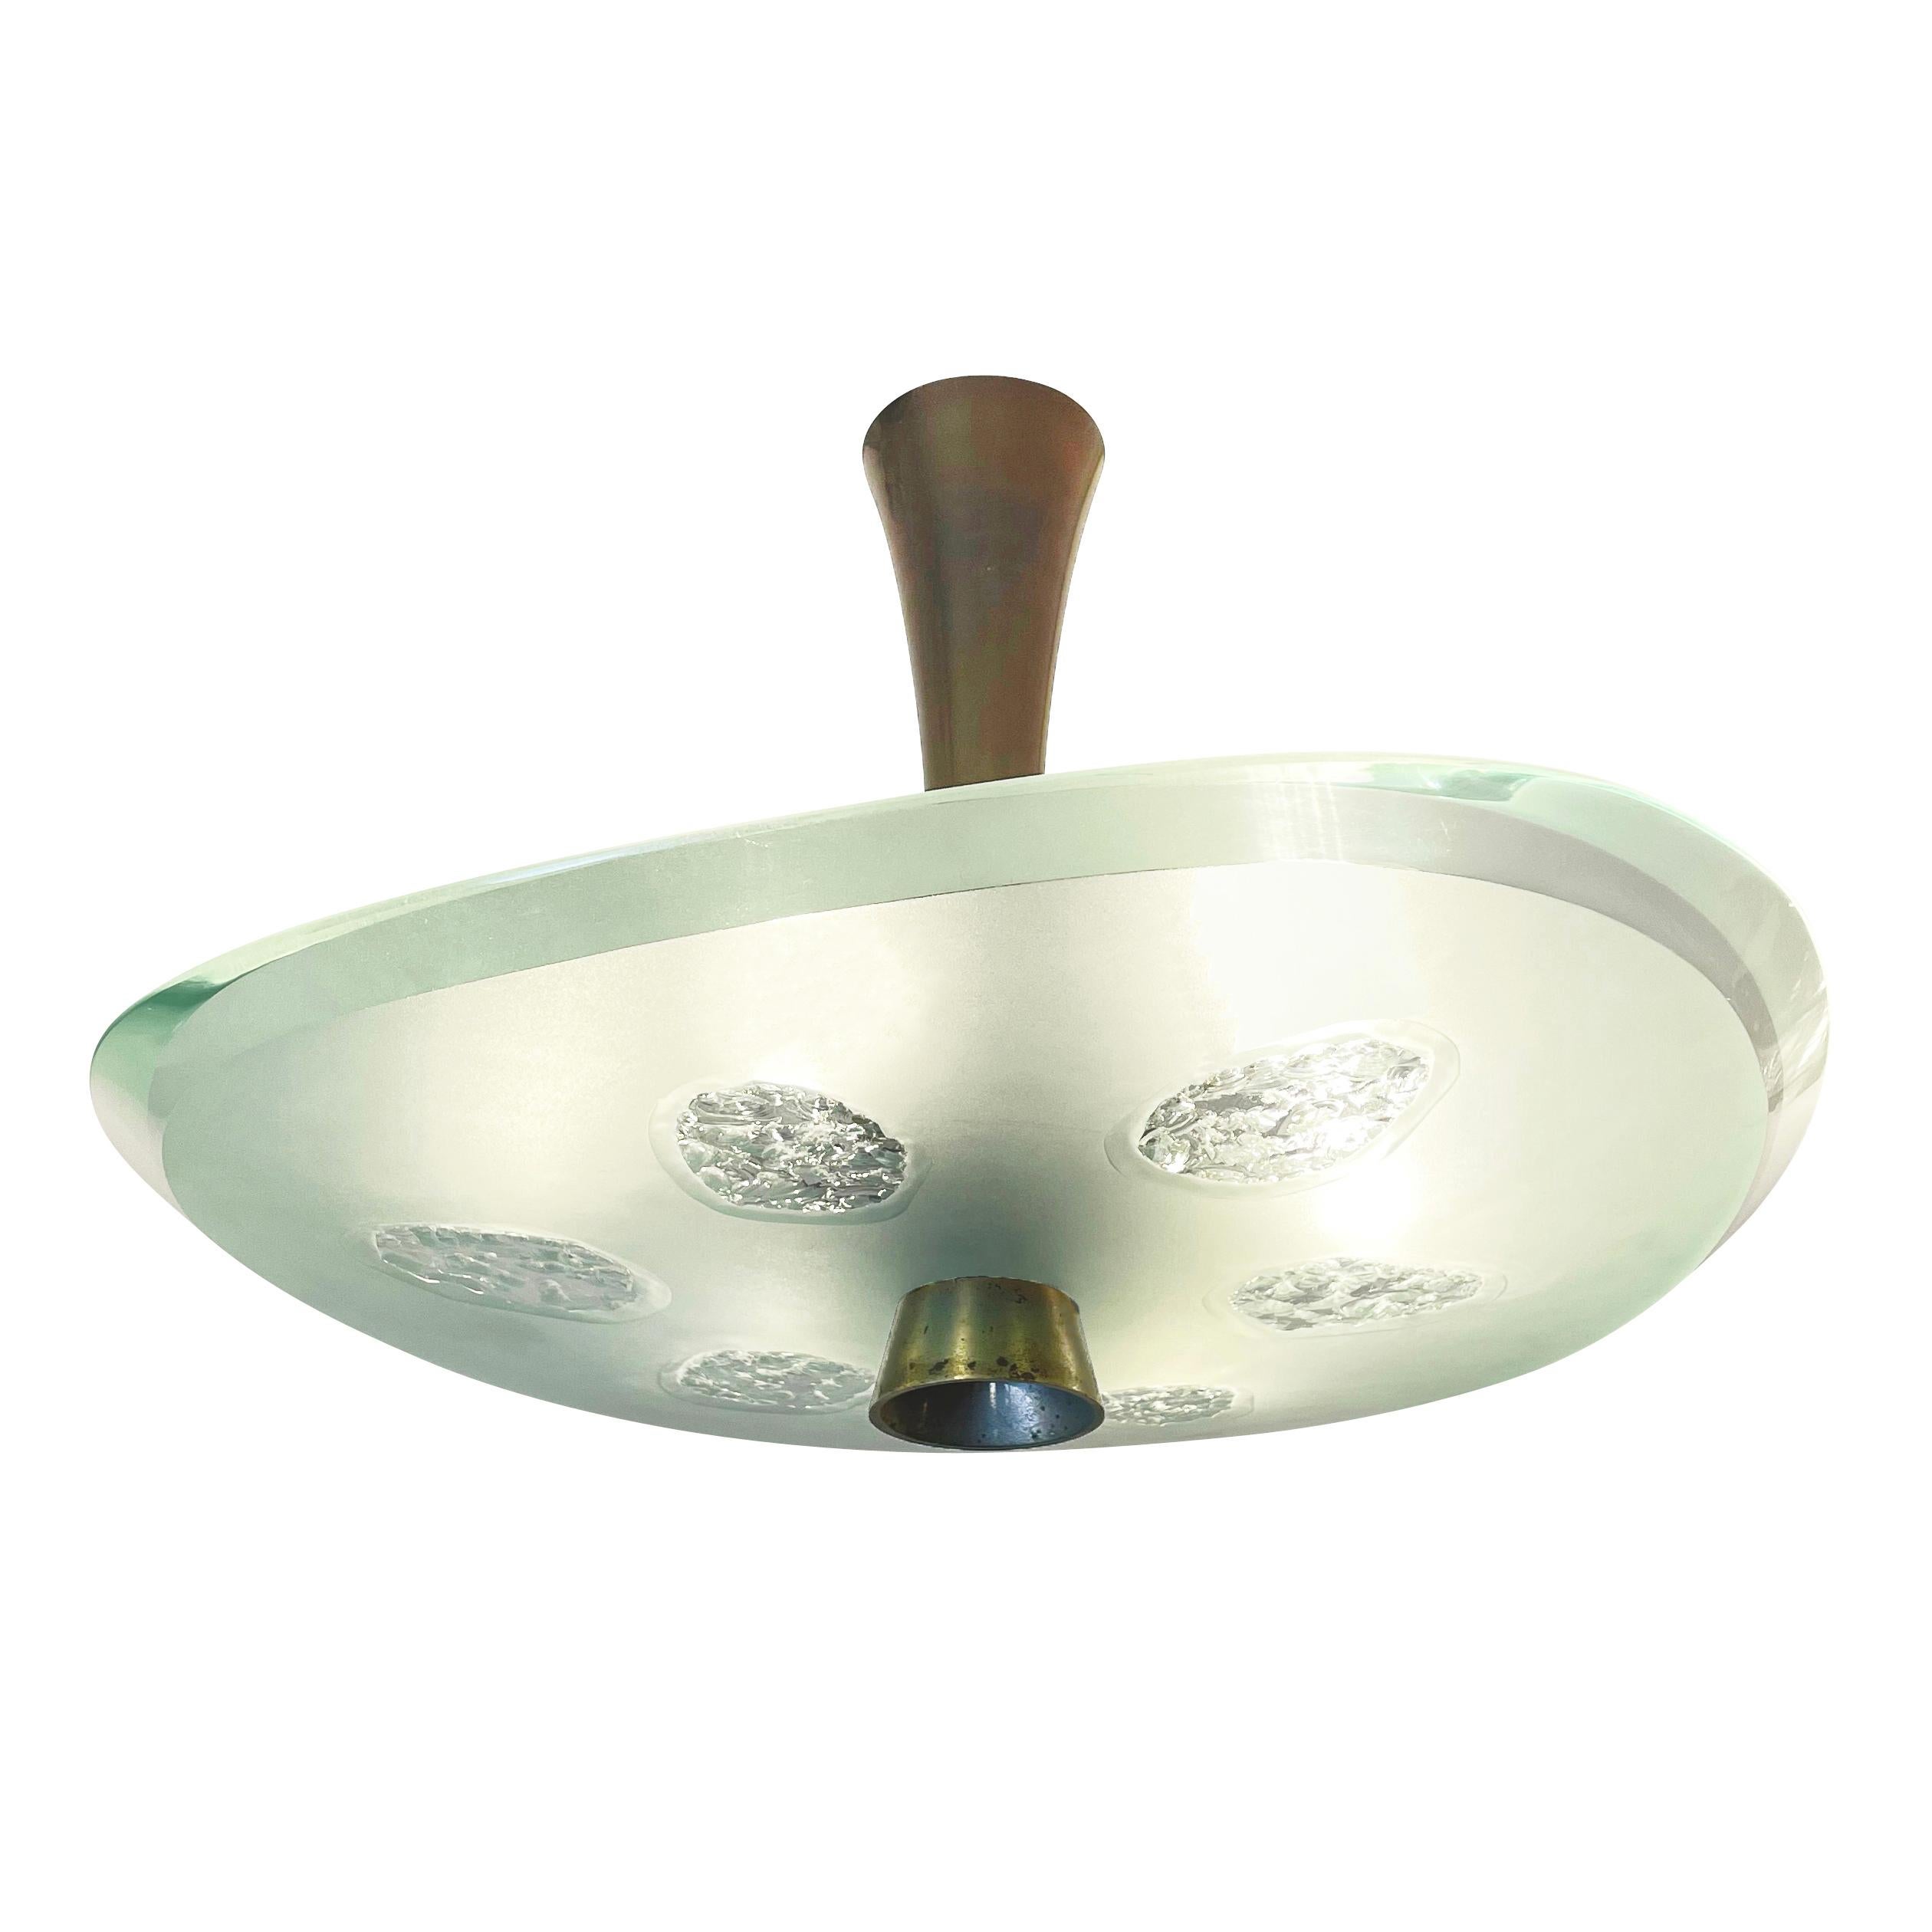 Fontana Arte ceiling light model 1748 designed by Max Ingrand in the 1950s. Features a beautiful thick glass shade with beveled edges which has been chiseled in six irregular areas. Holds six candelabra bulbs. 

Condition: Excellent vintage